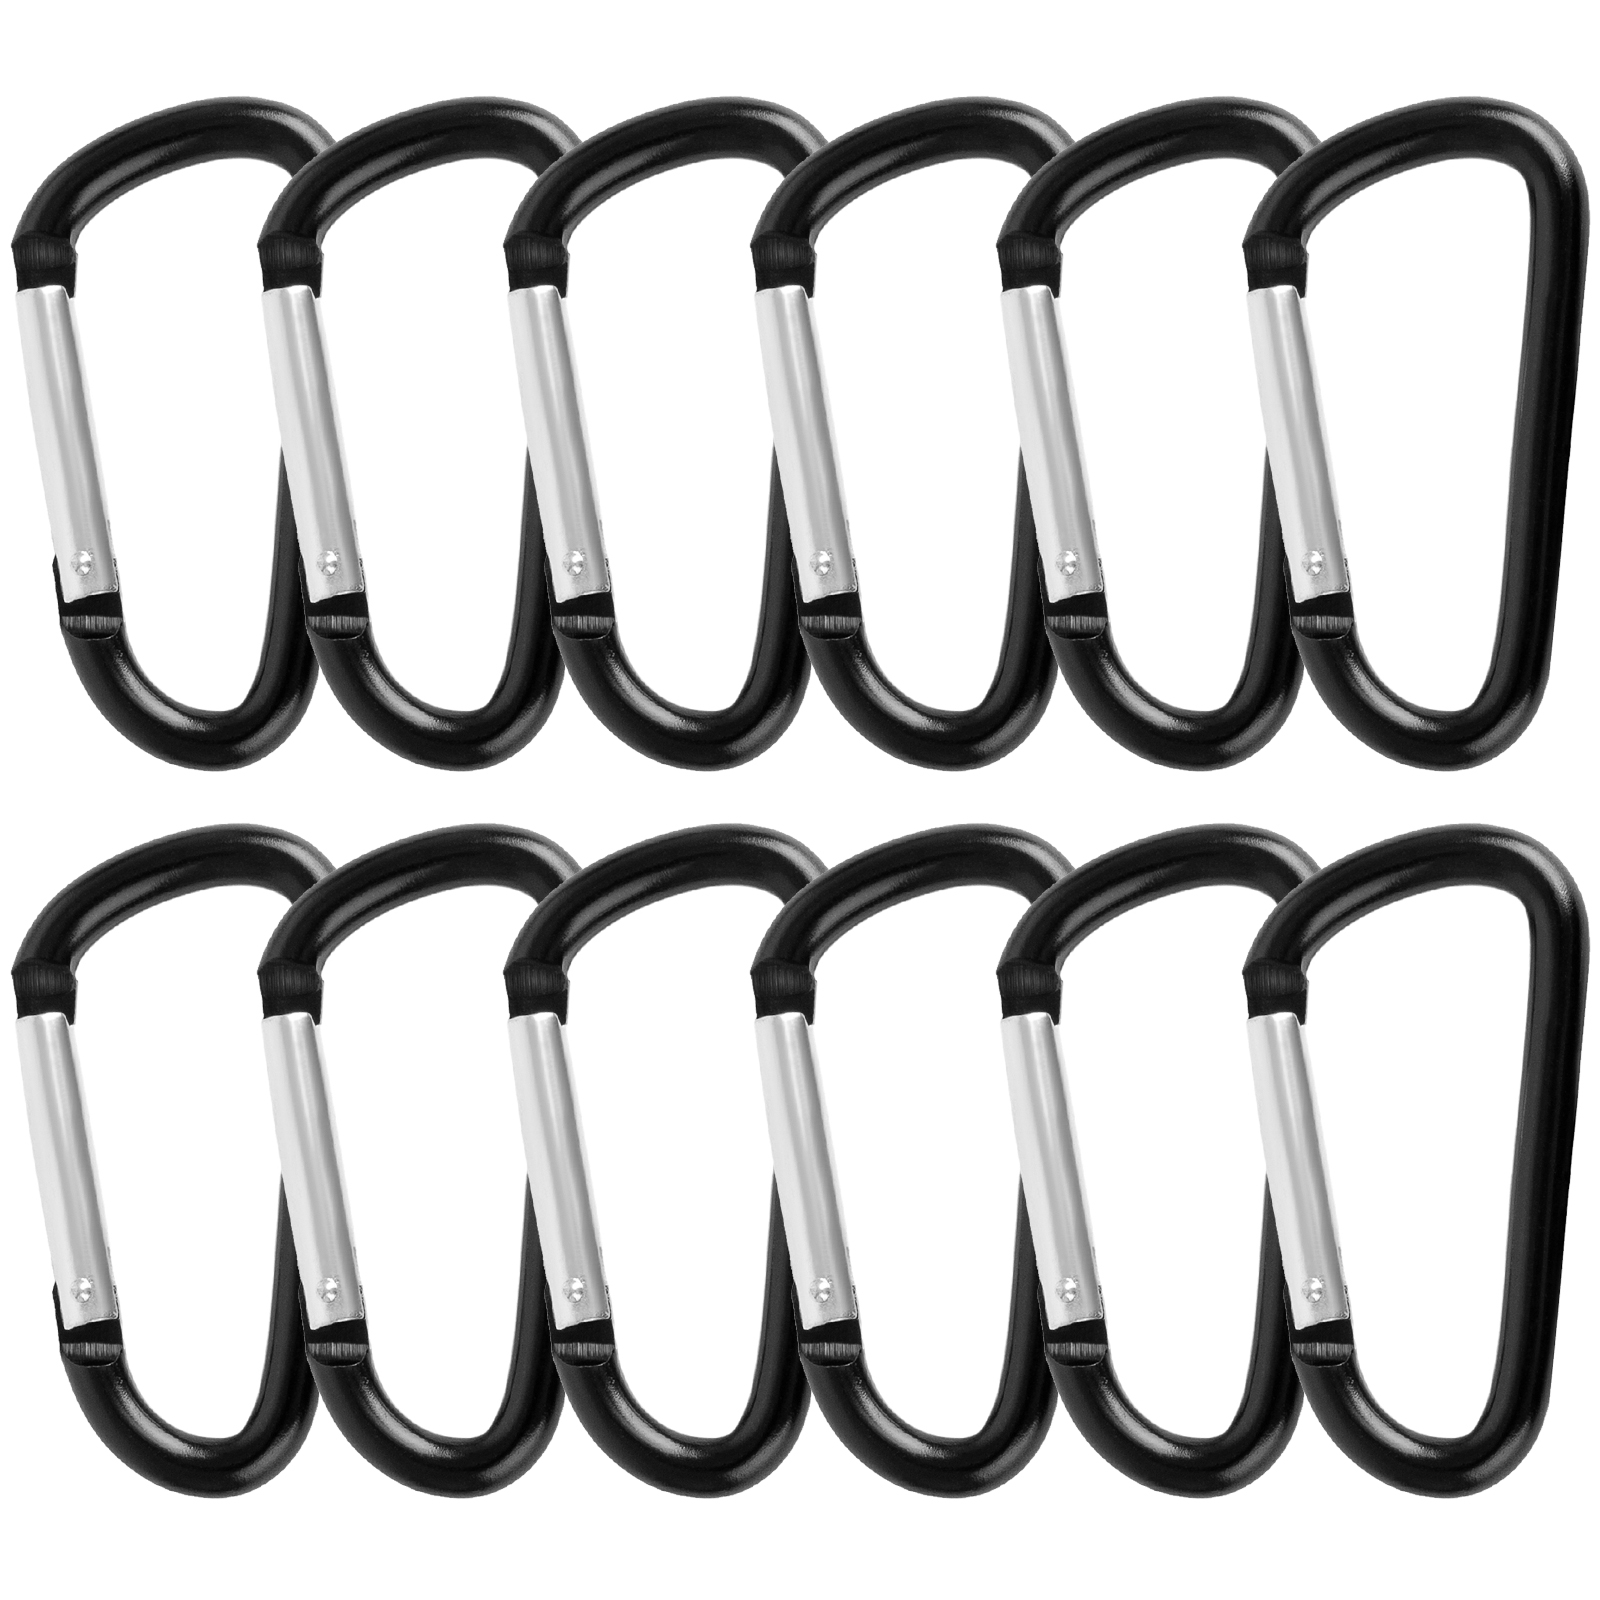 TOPTIE 48PCS Carabiner Keychain Carabiners Clip Heavy Duty3 Inch Aluminum D  Ring Clips Spring Snap Hook